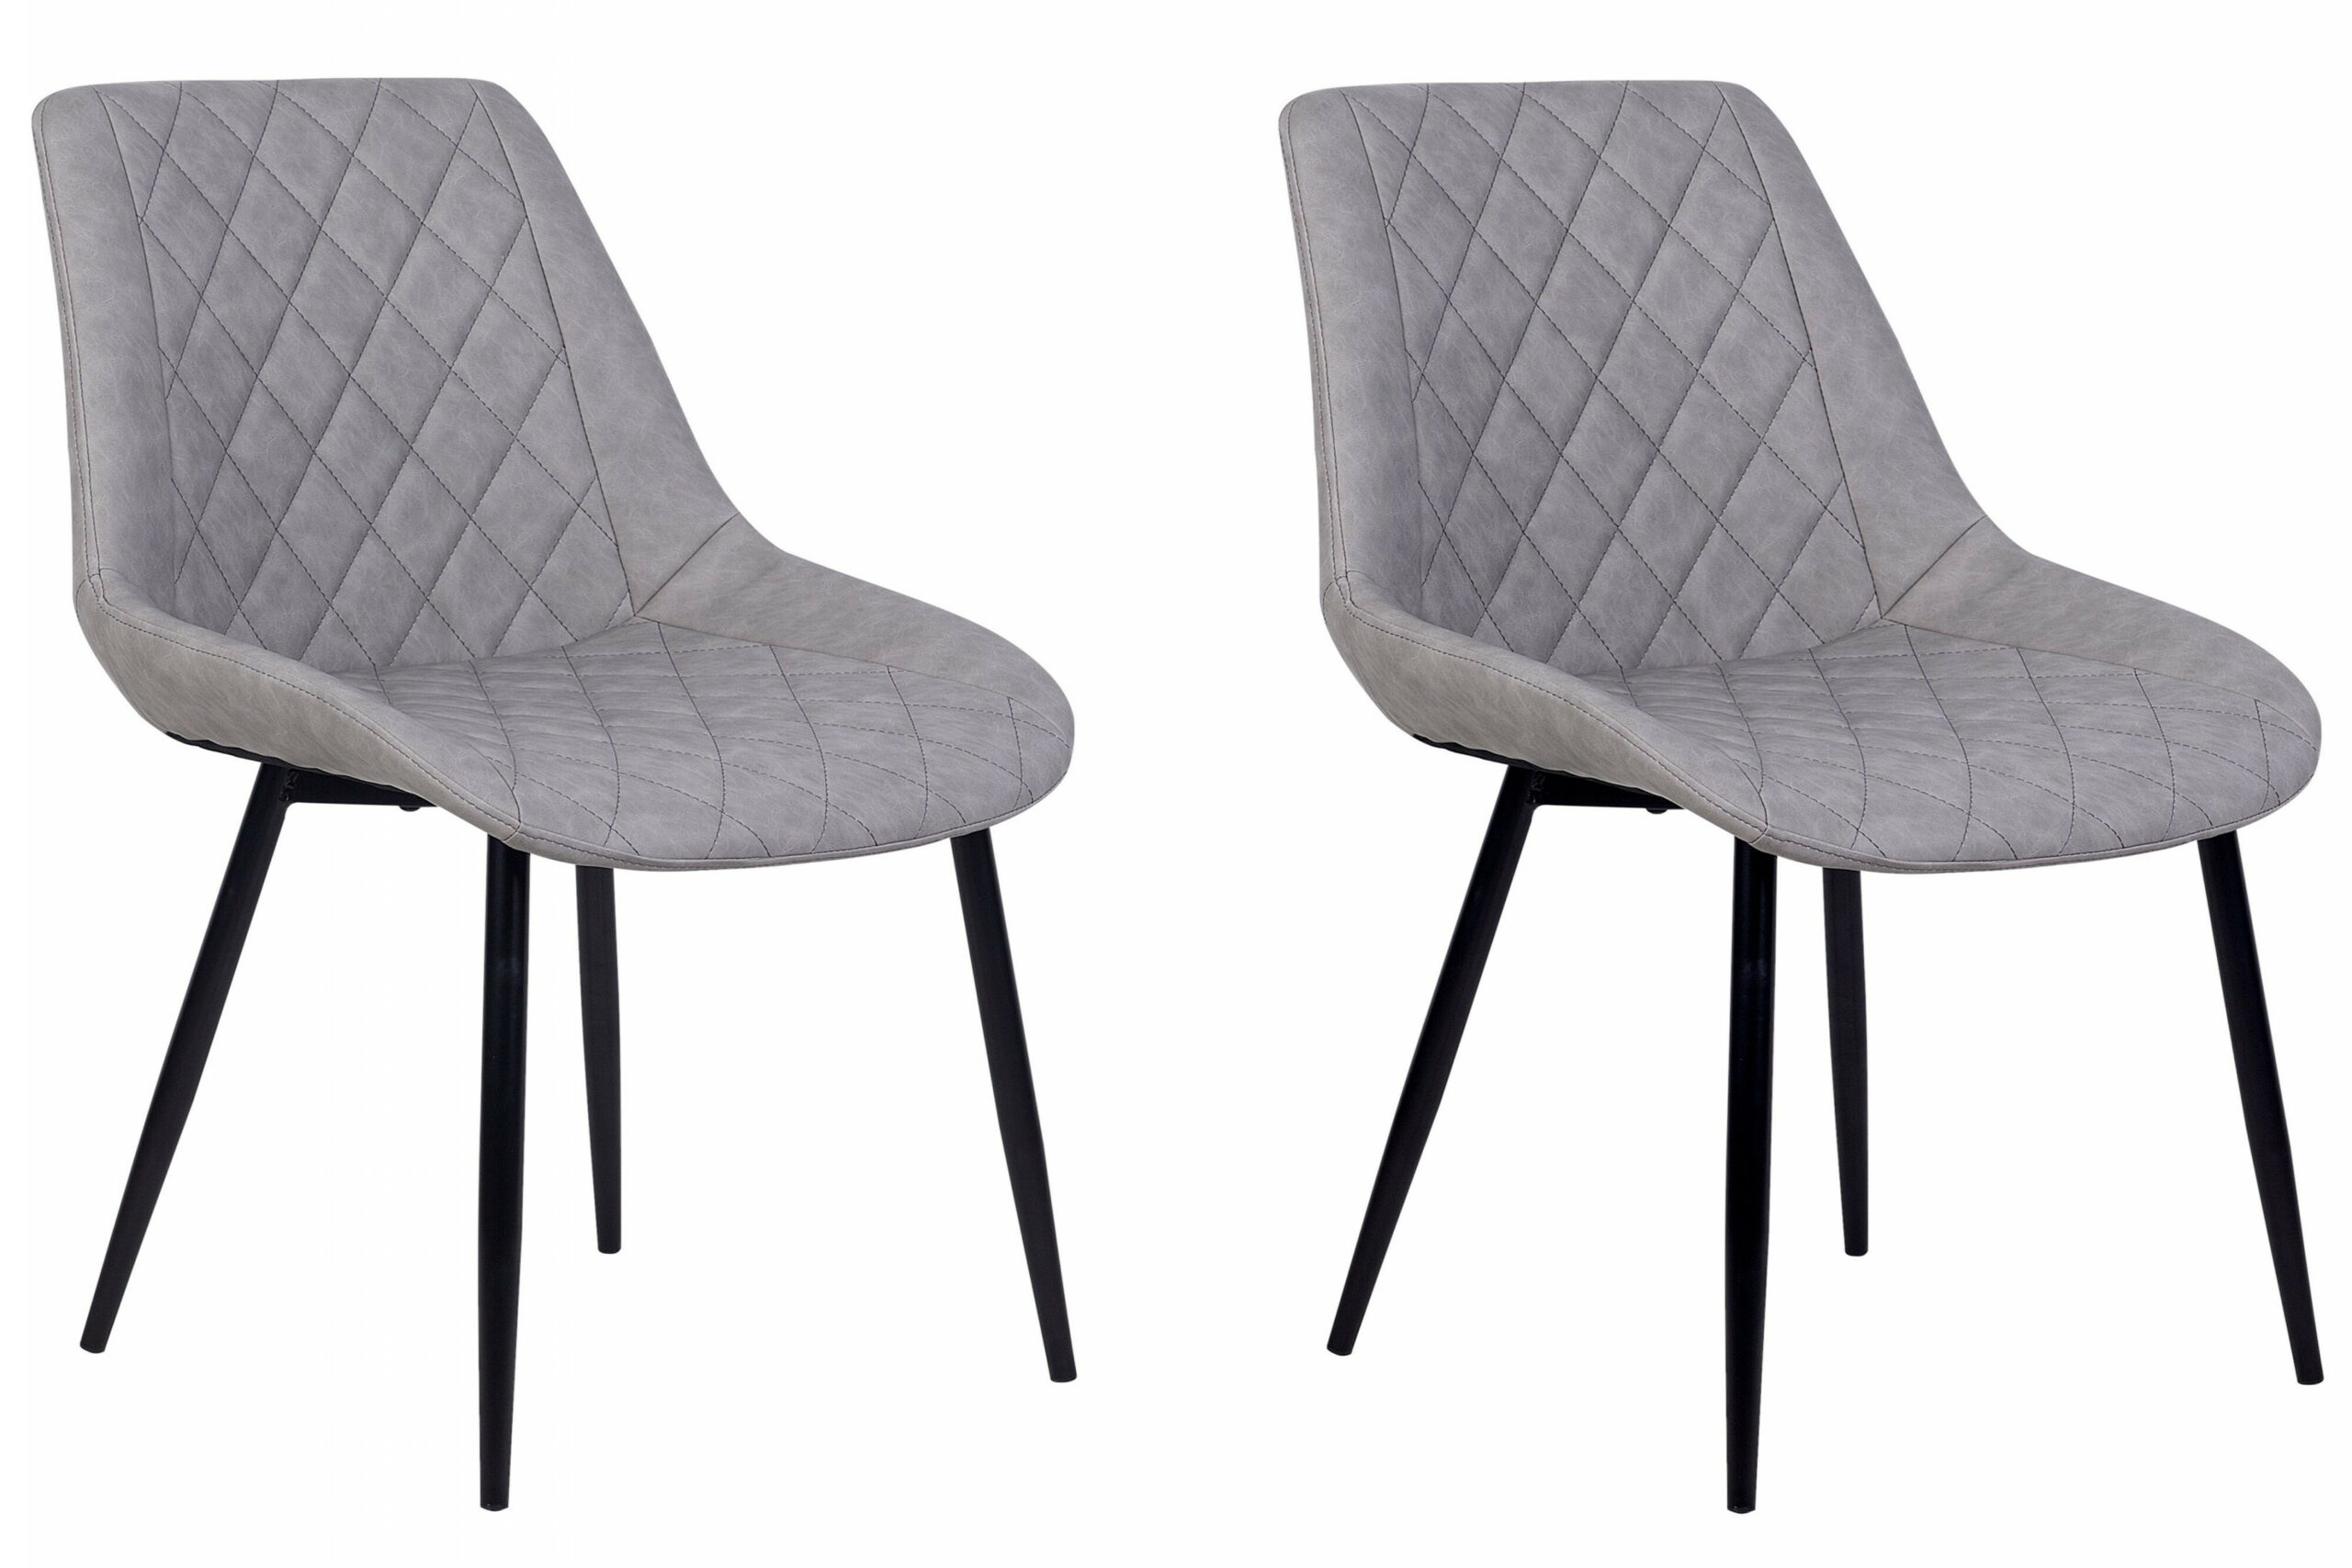 Set of  Faux Leather Dining Chairs Grey MARIBEL  Furniture